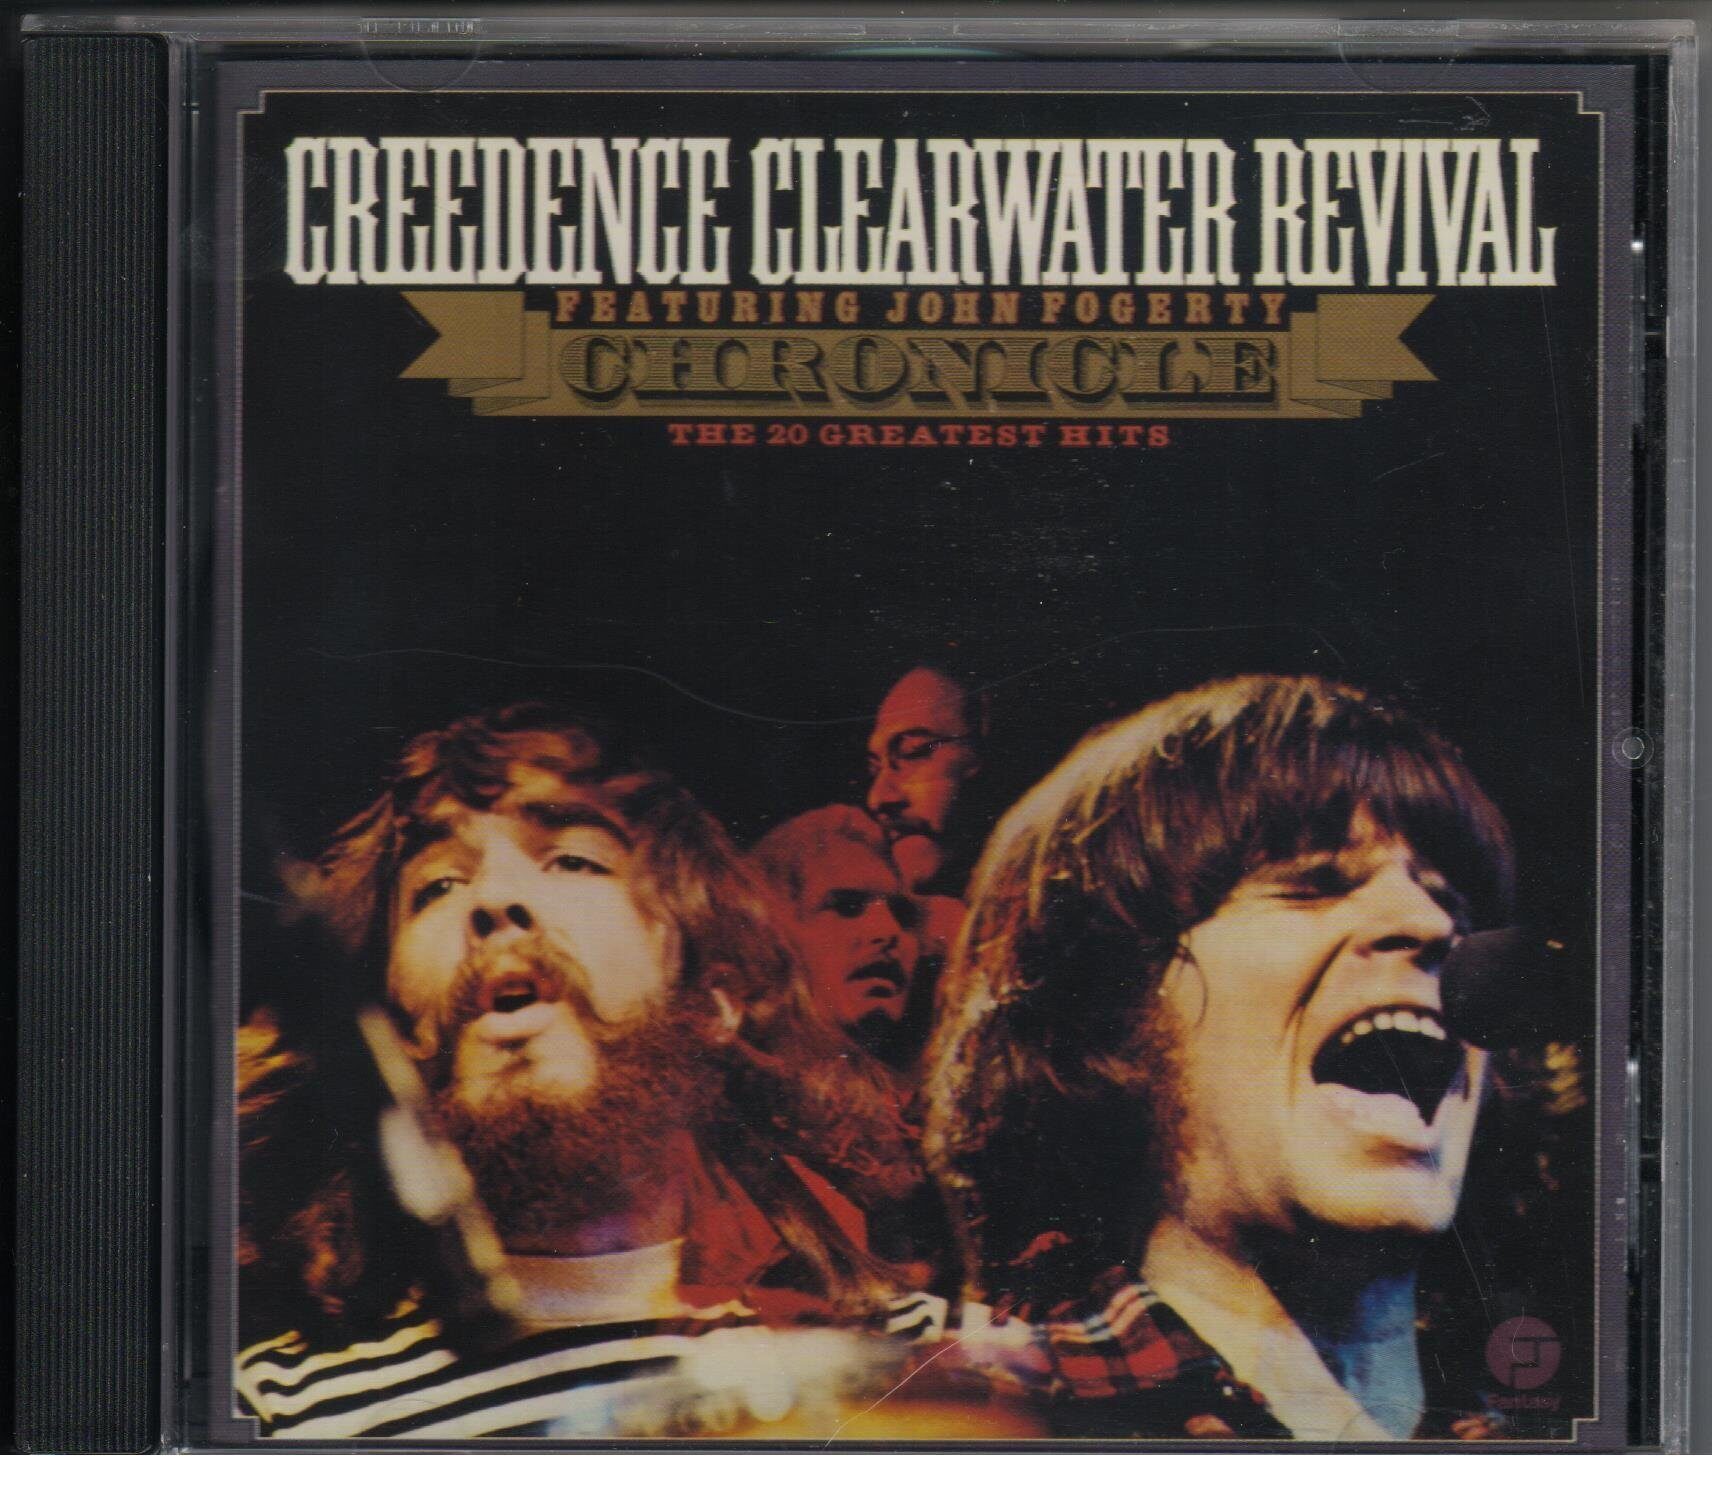 See the rain creedence. Creedence Clearwater Revival Греатест хитс. Creedence Clearwater Revival 1968. Creedence Clearwater Revival 1968 LP. Creedence Clearwater Revival - have you ever seen the Rain.